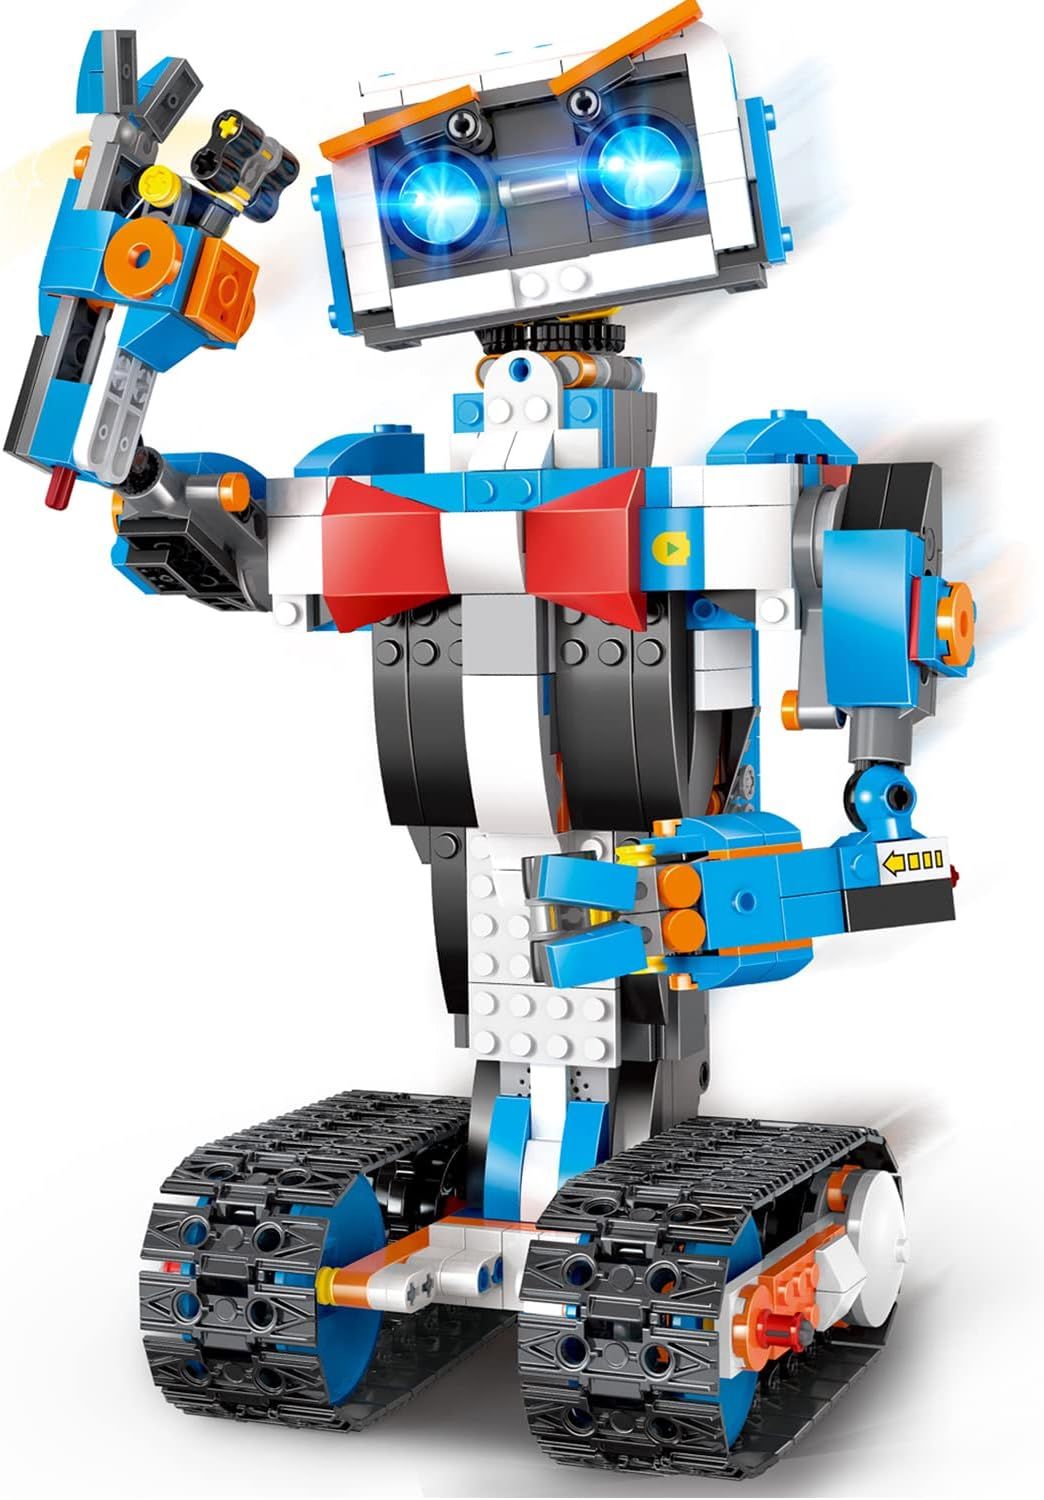 OKK Robot Building Toys for Boys, STEM Projects for Kids Ages 8-12, Remote & APP Controlled Engineer | Amazon (US)